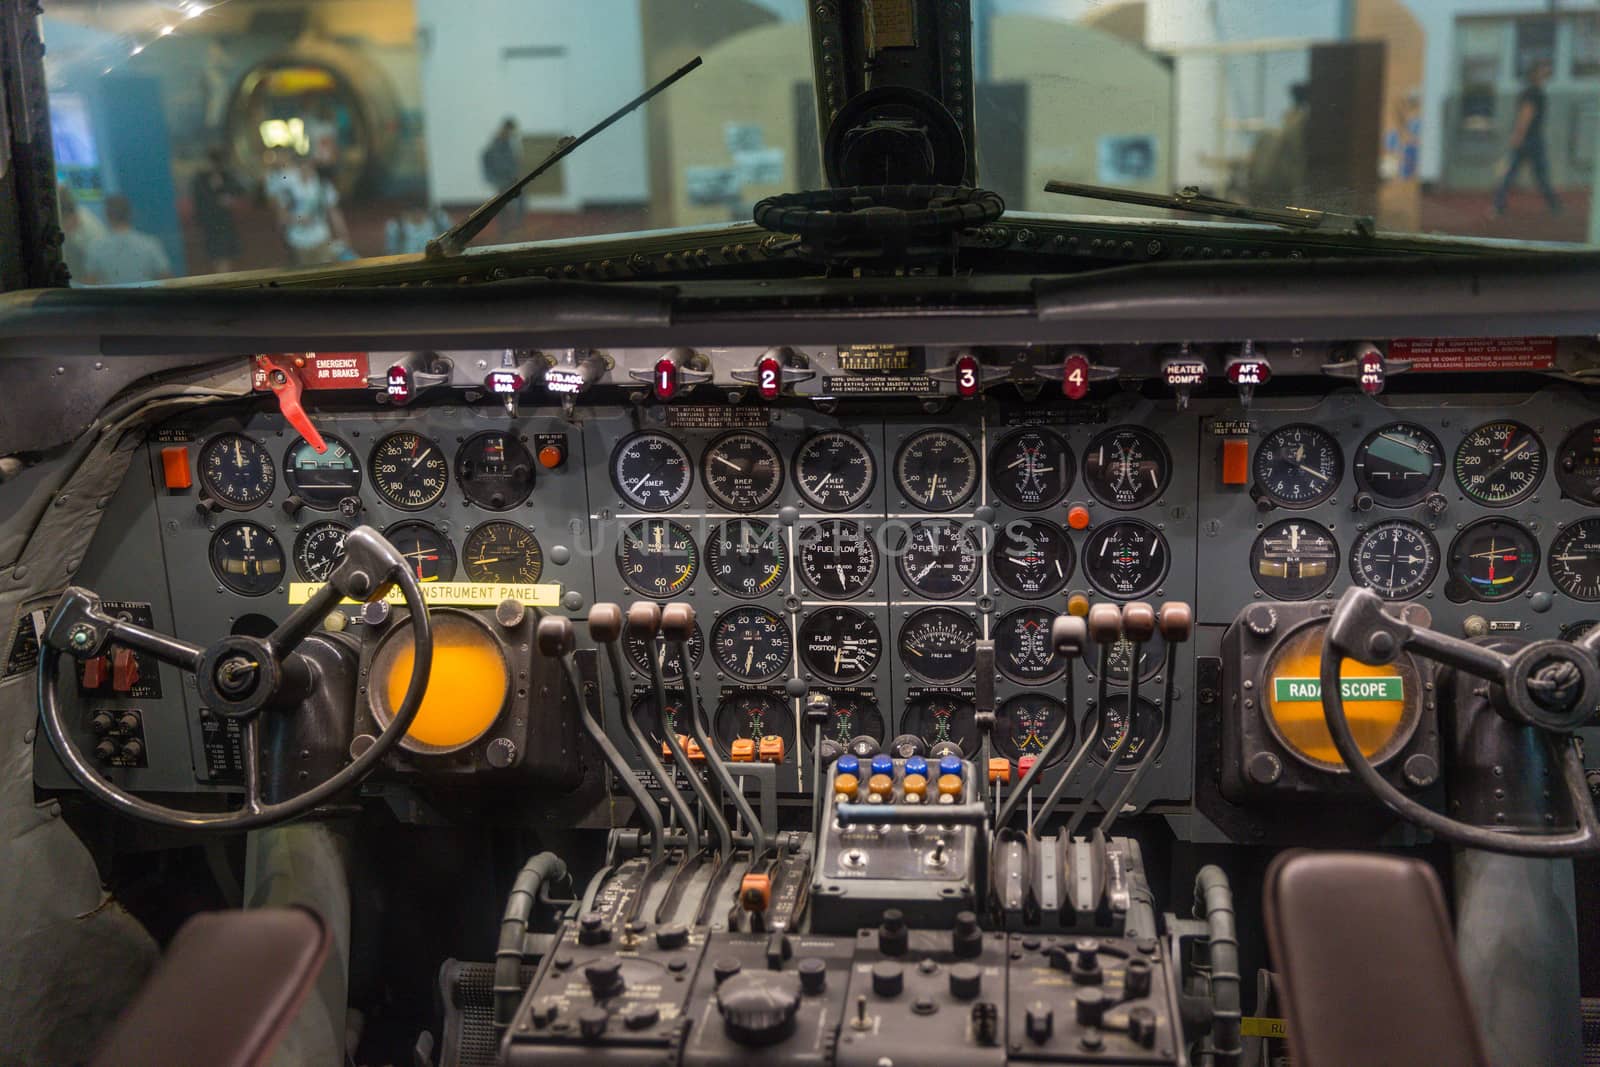 The cockpit of an old plane by chrisukphoto